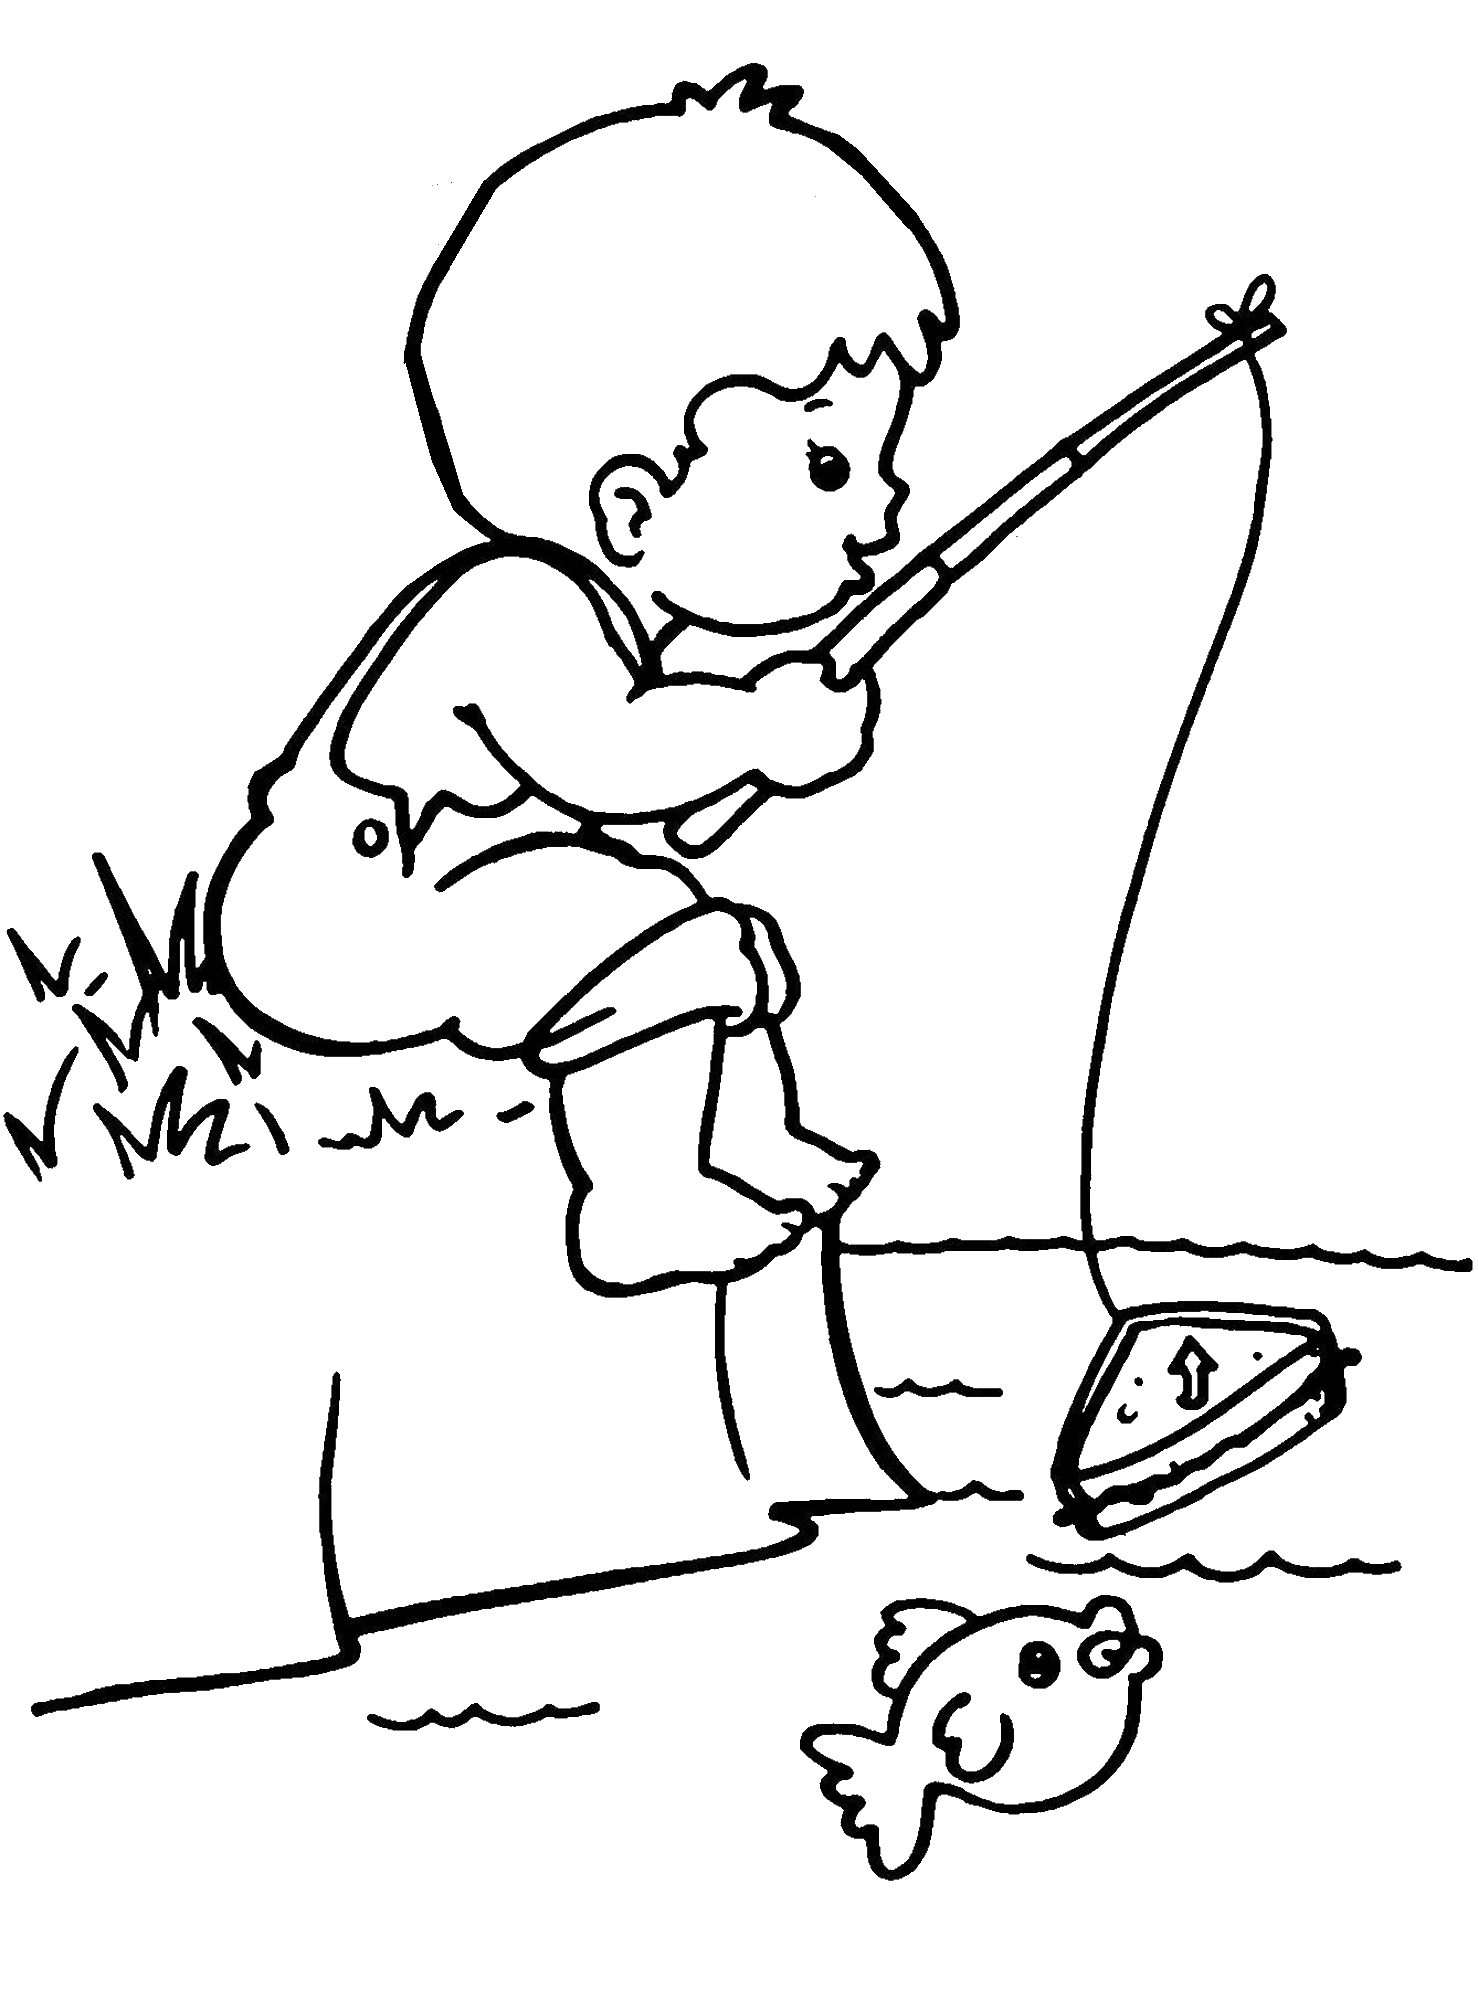 Son clipart fishing. Little girl line drawing